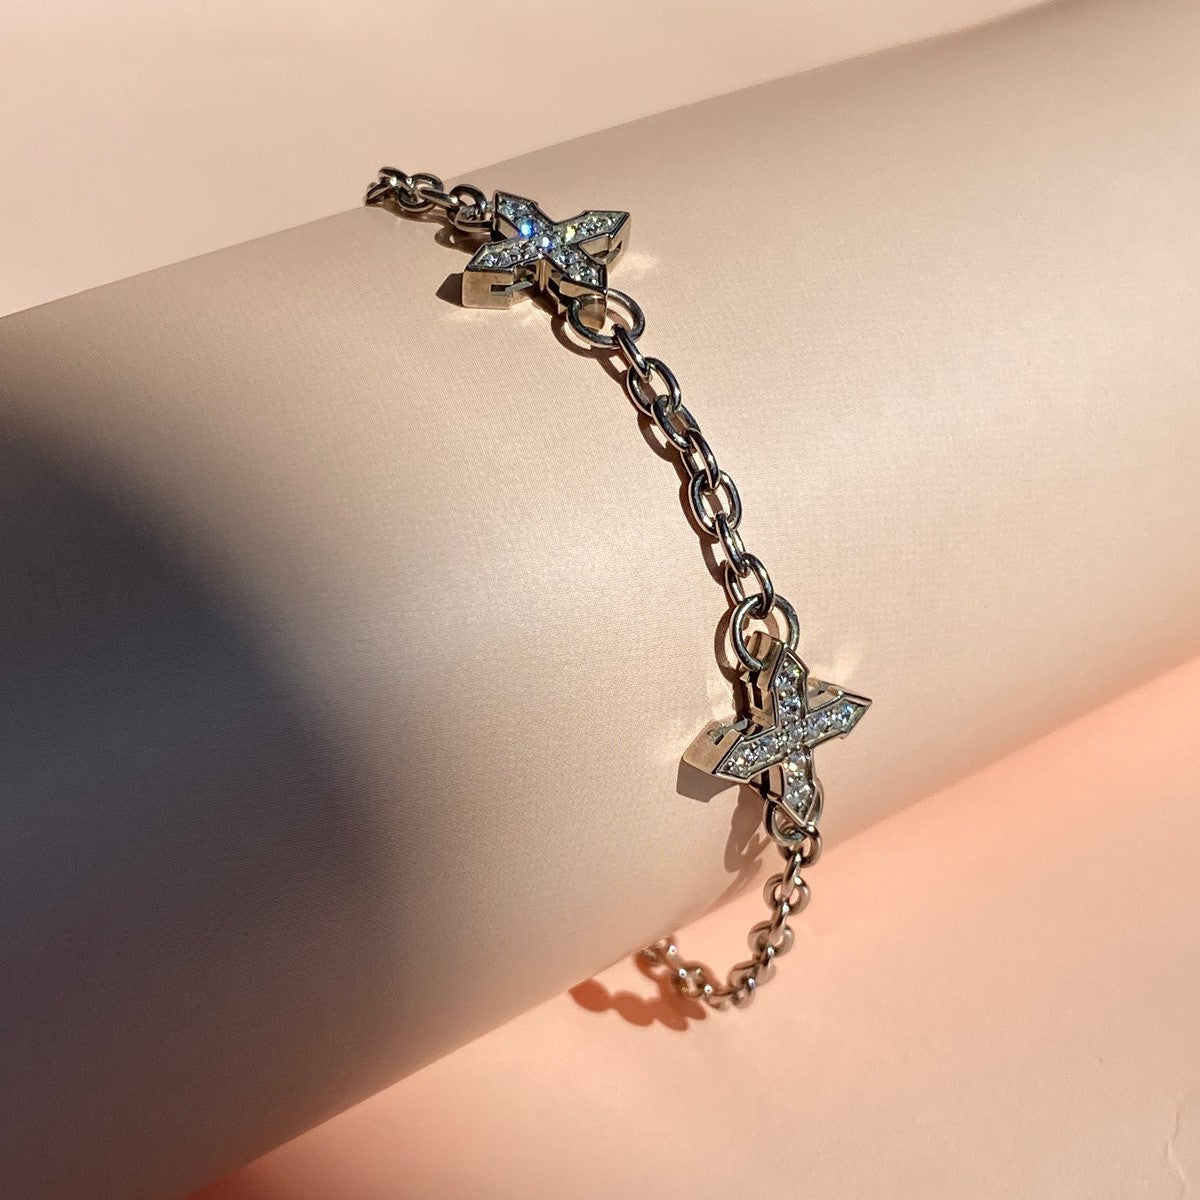 CHAIN BRACELET "TWO STARS "GLOW" WITH MOISSANITE / SILVER